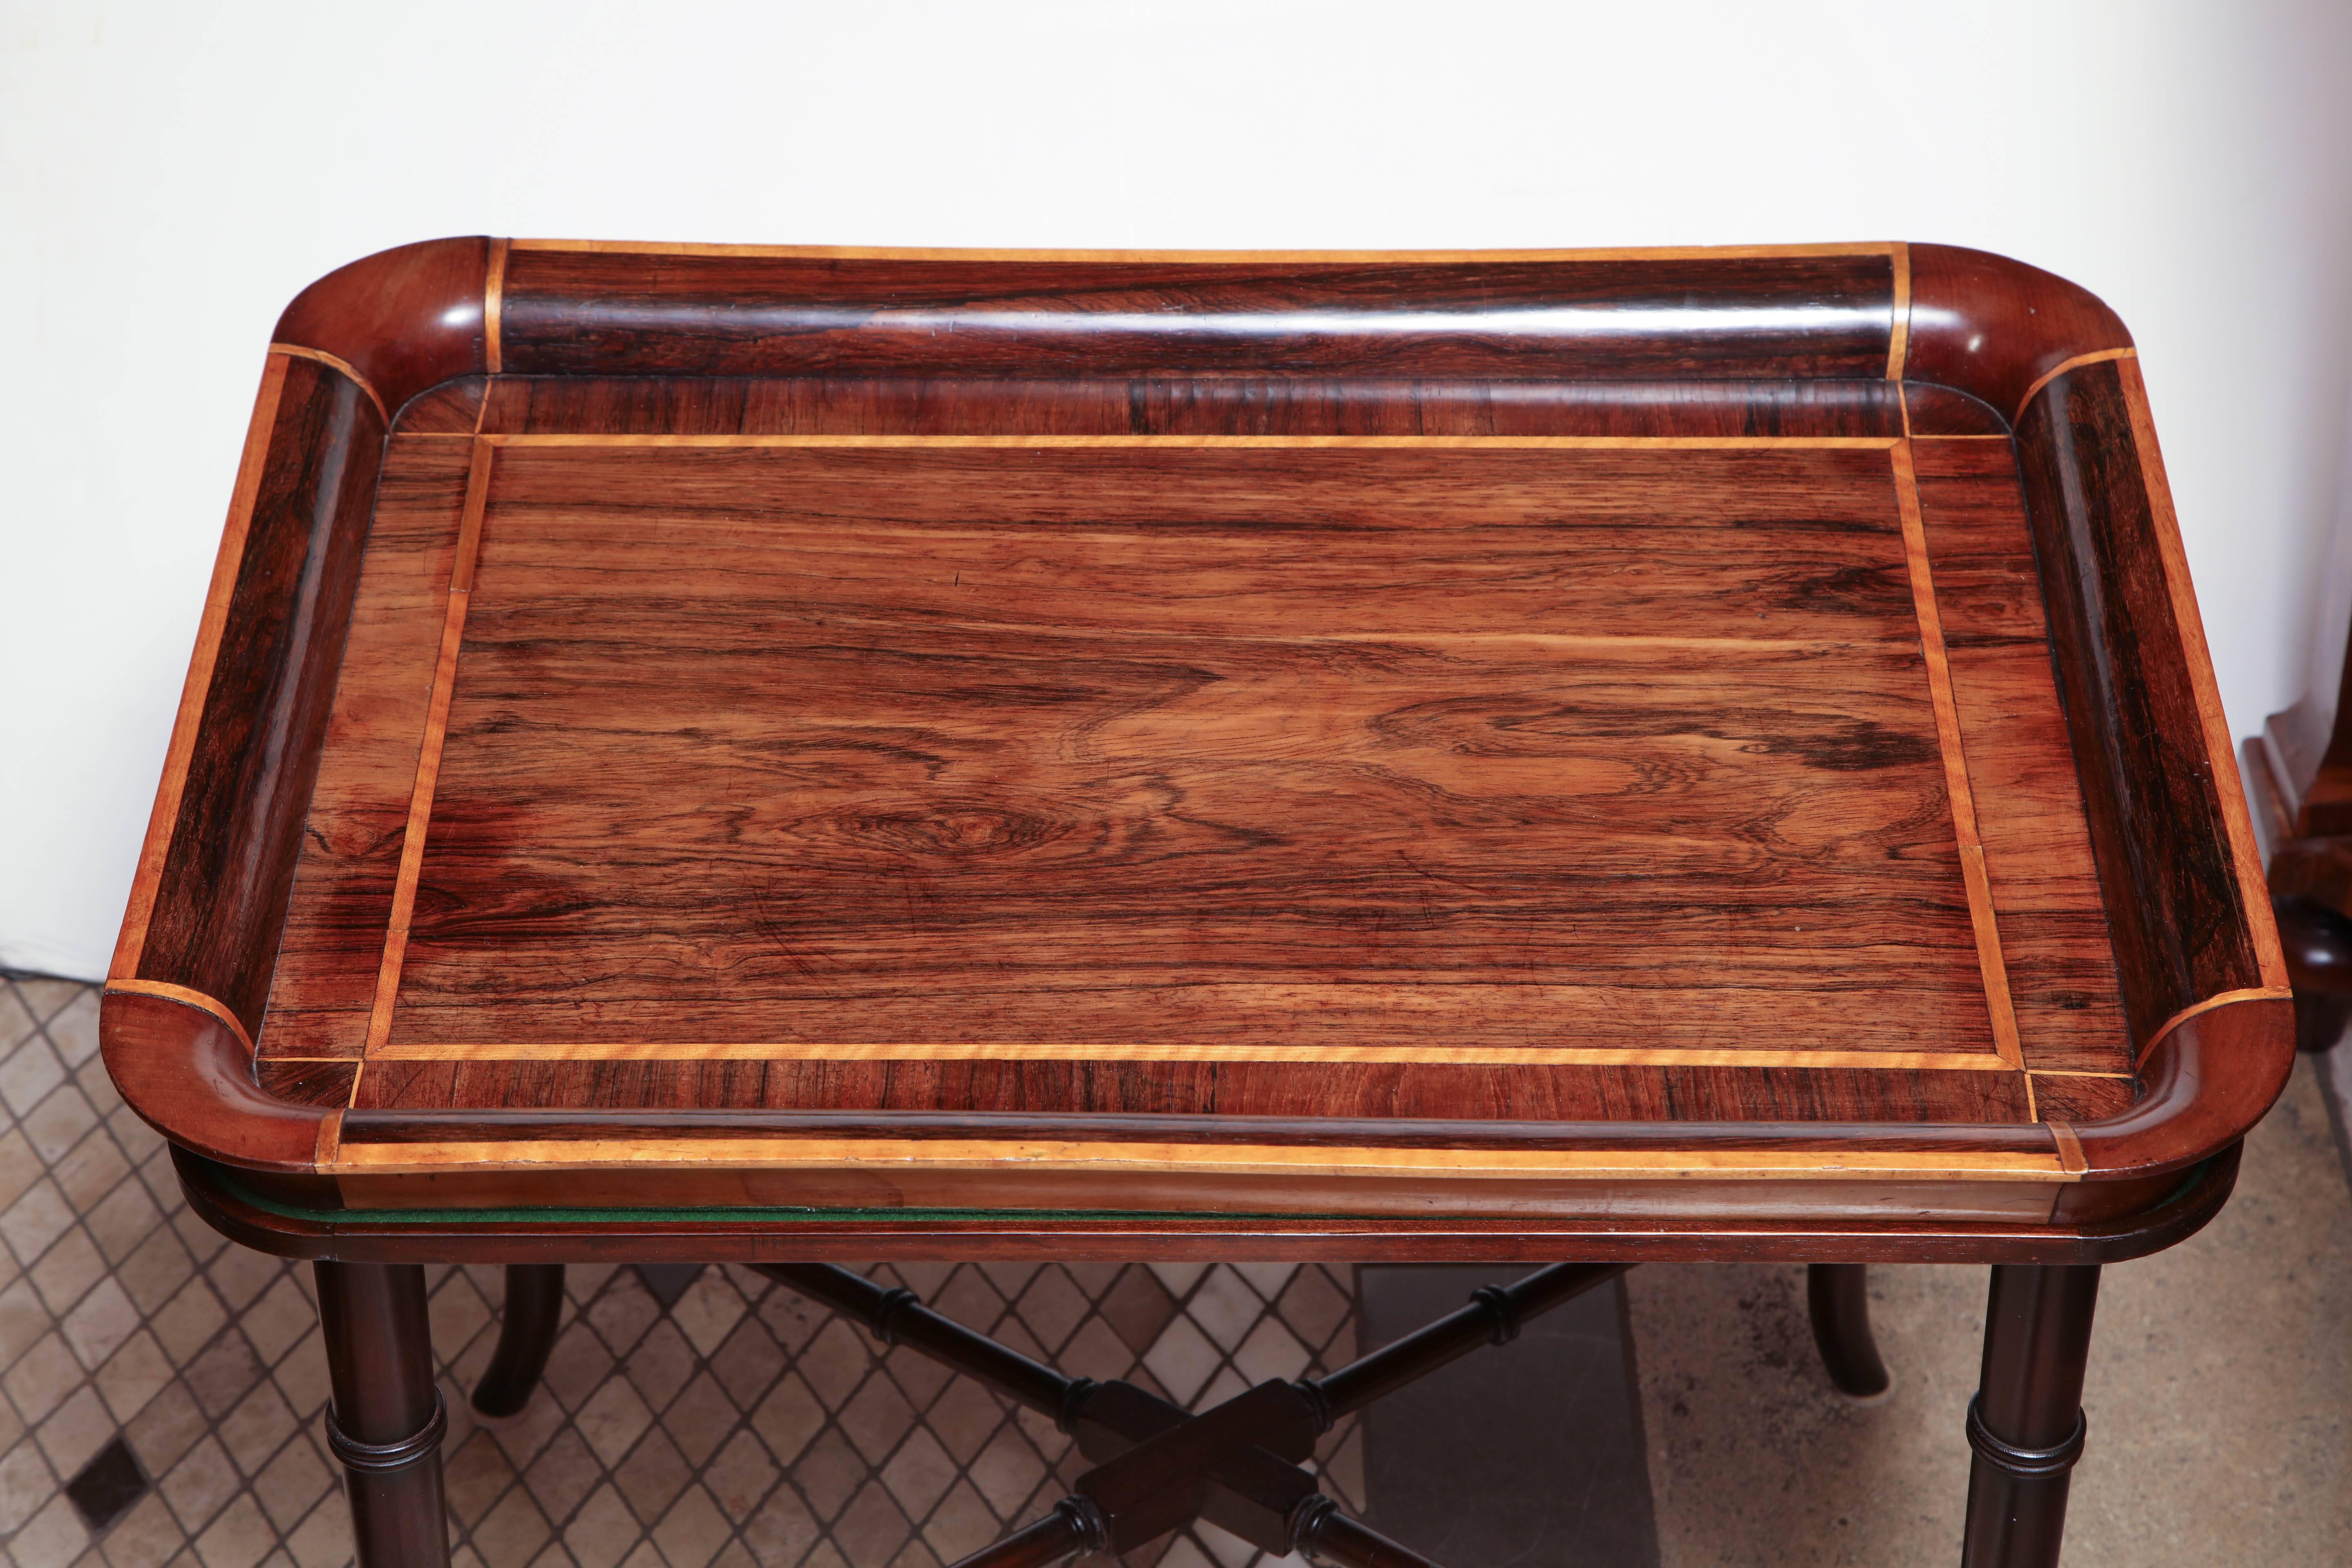 Regency English Rosewood Tray Top Coffee Table